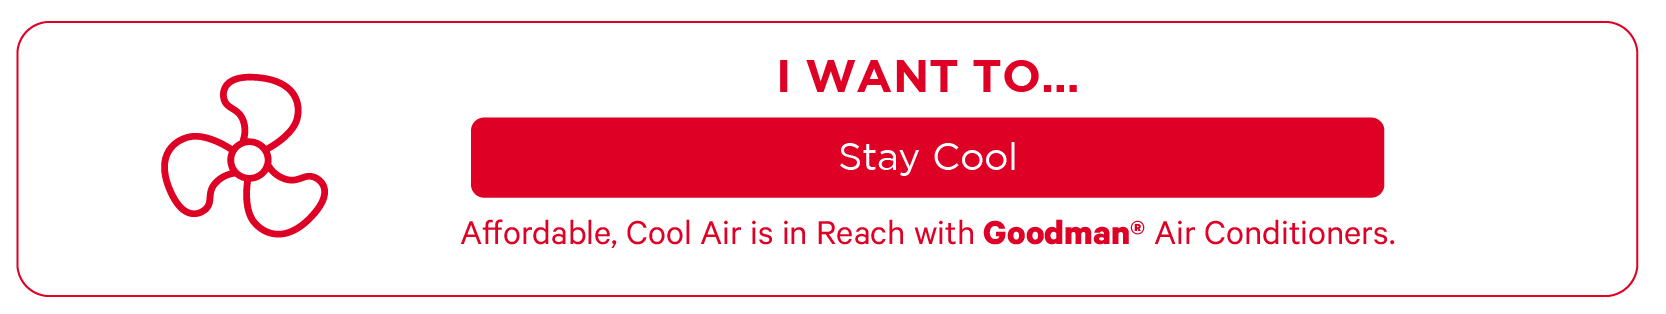 Stay cool with Goodman® products